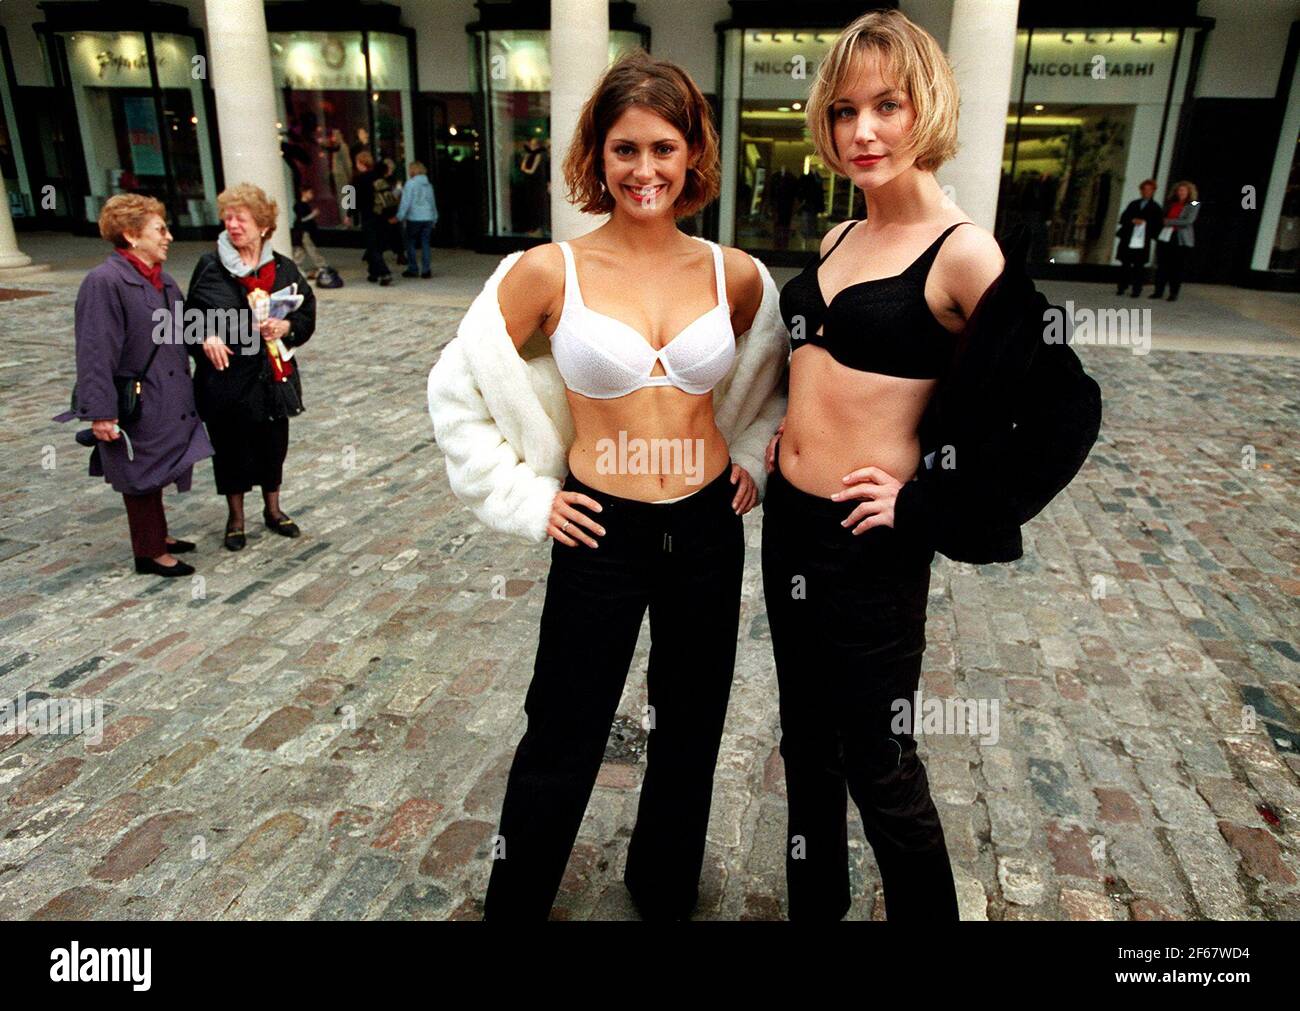 TWO GIRLS MODEL THE NEW BIOFORM BRA FROM CHARNOS CREATED BY